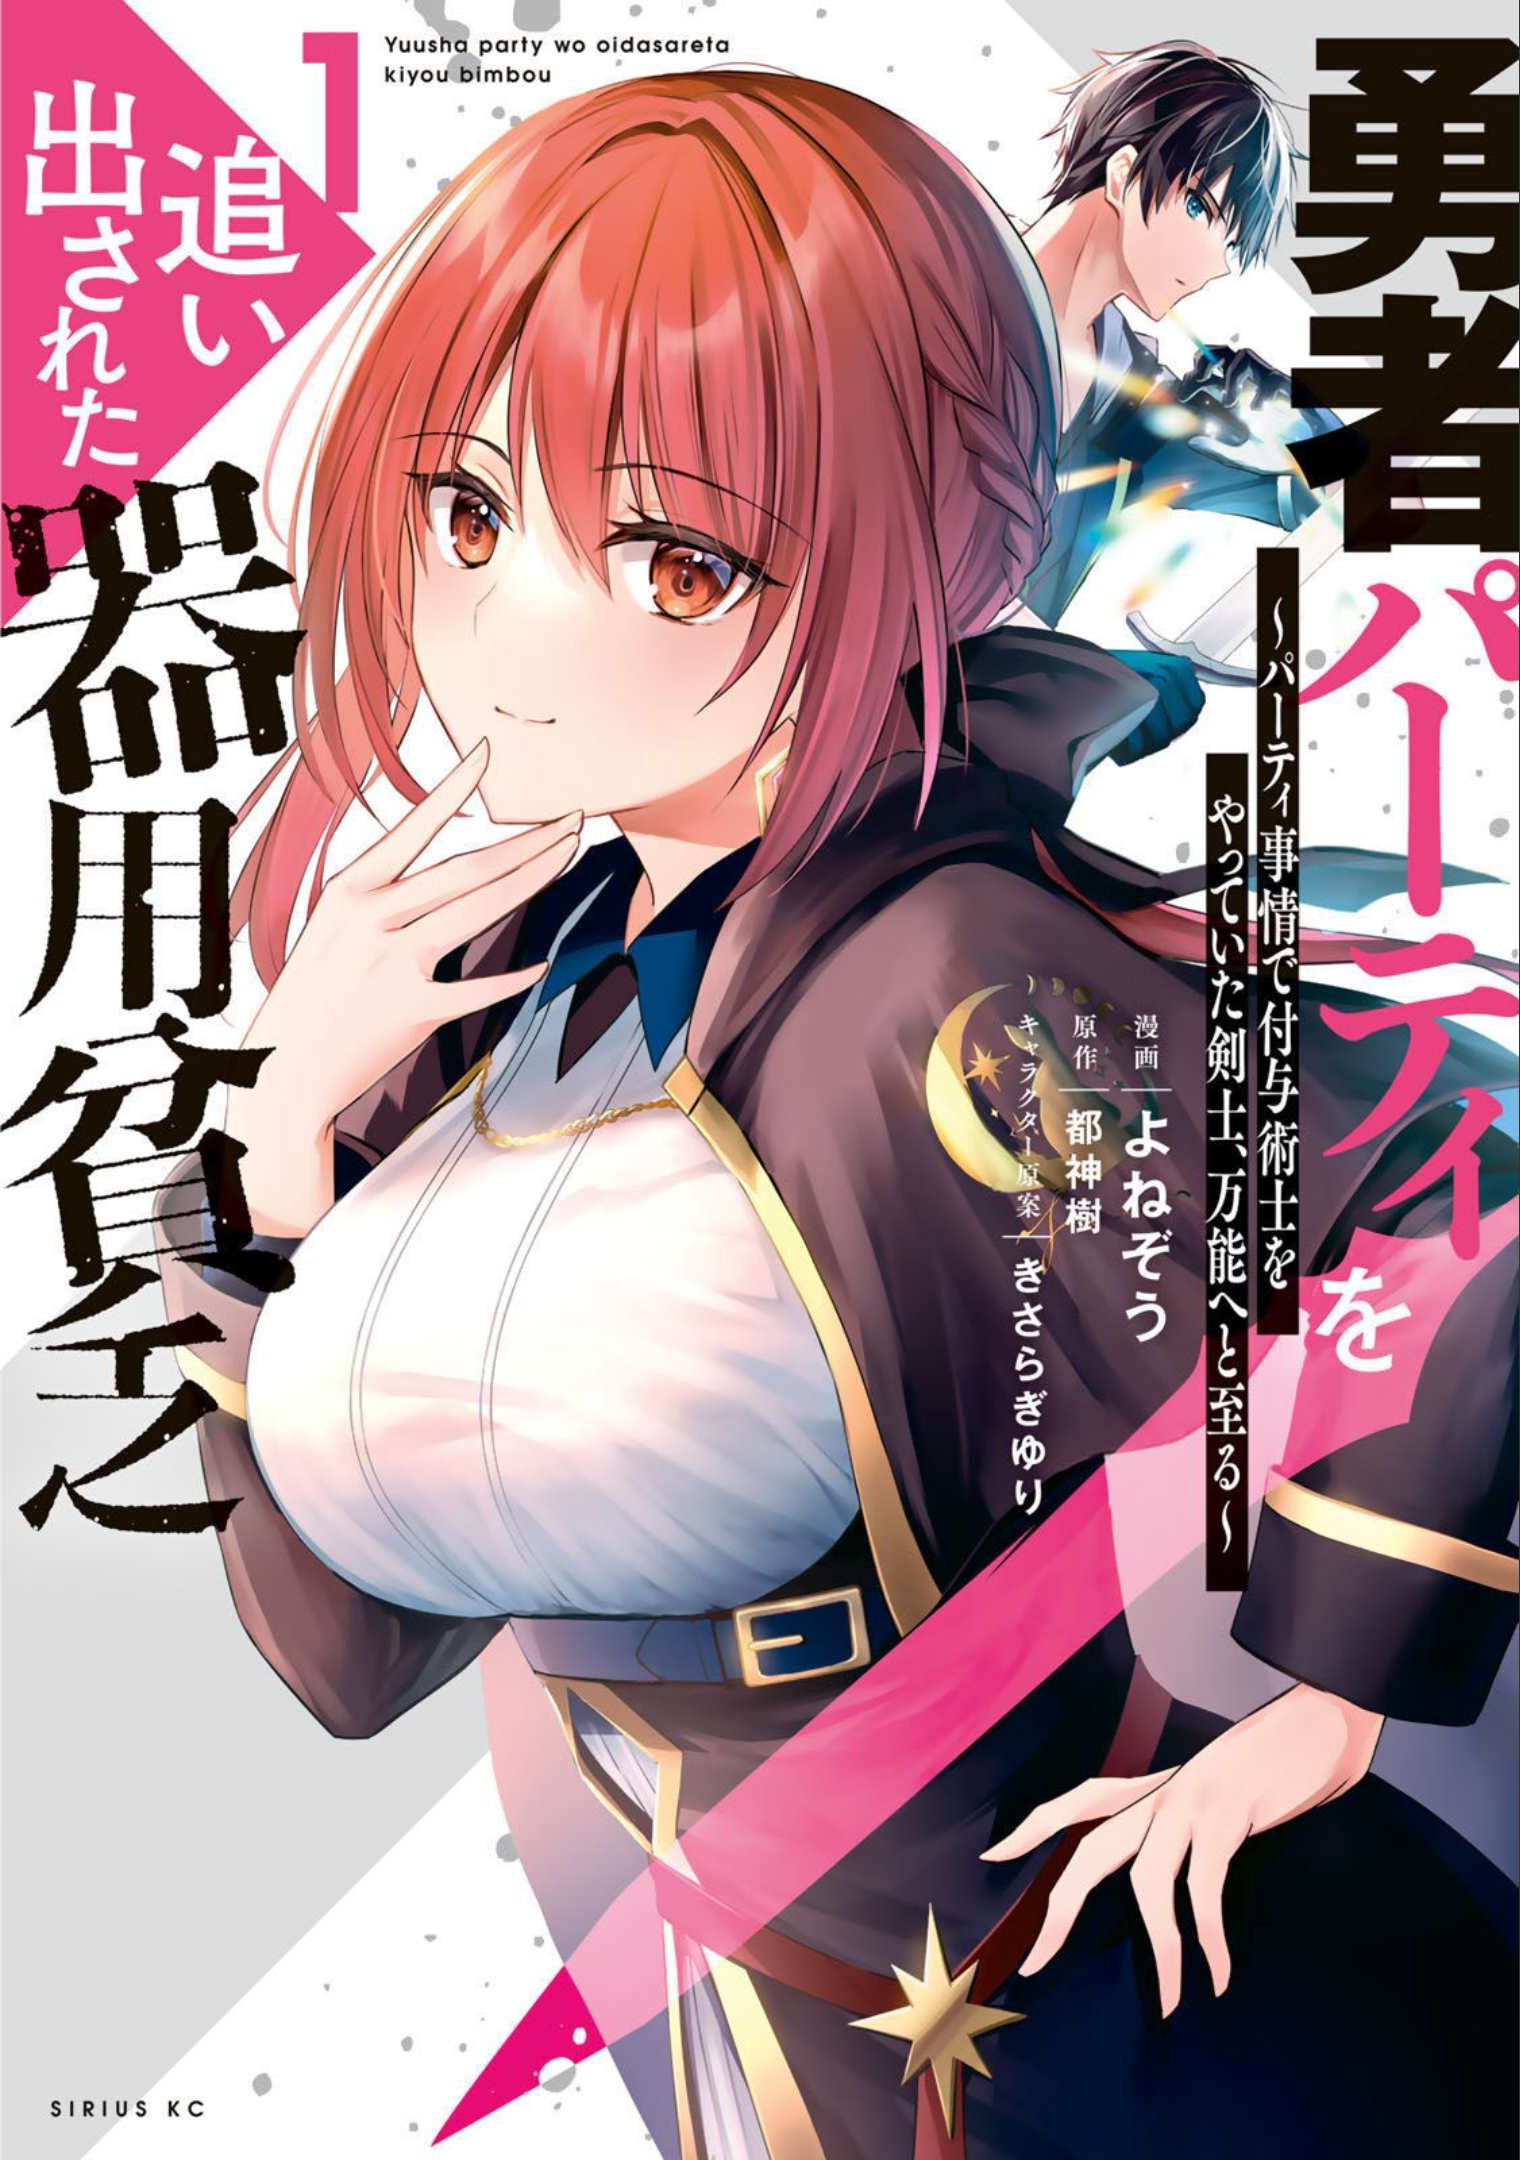 Jack Of All Trades Manga Read The Jack-of-all-trades Kicked Out of the Hero's Party ~ The Swordsman  Who Became a Support Mage Due to Party Circumstances, Becomes All Powerful  - manga Online in English